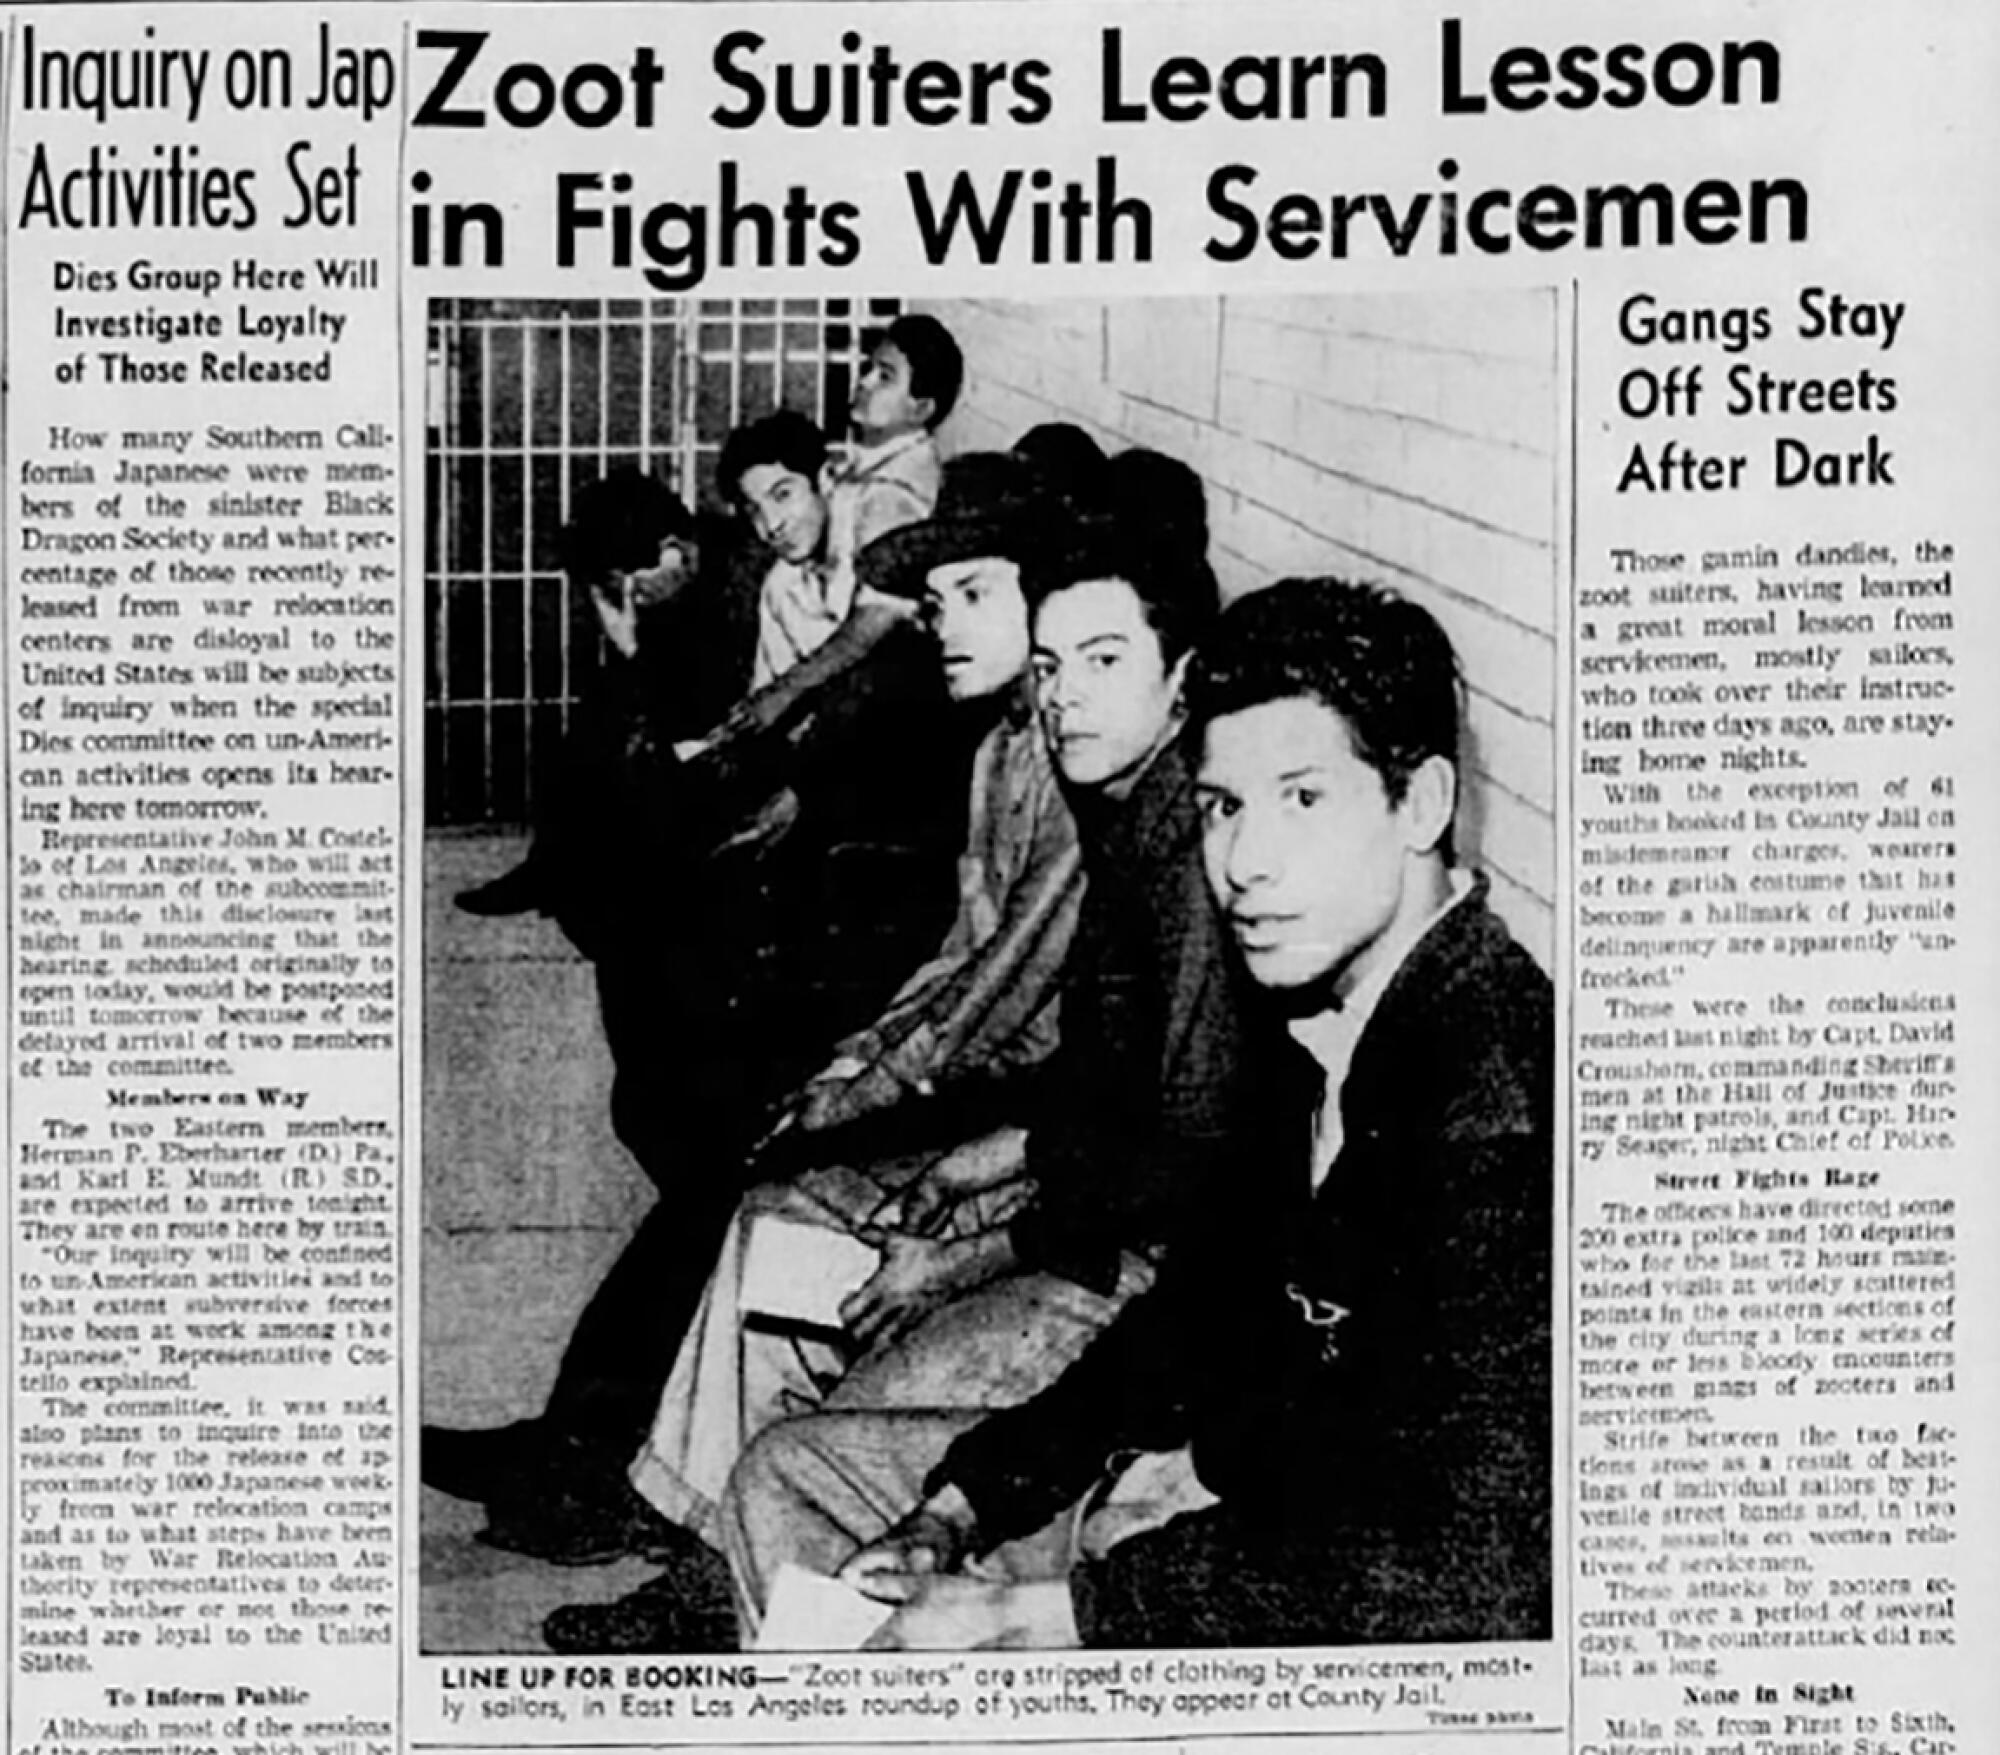 Headlines read "Zoot suiters learn lesson in fights with servicemen" and "Inquiry on Jap activities set"